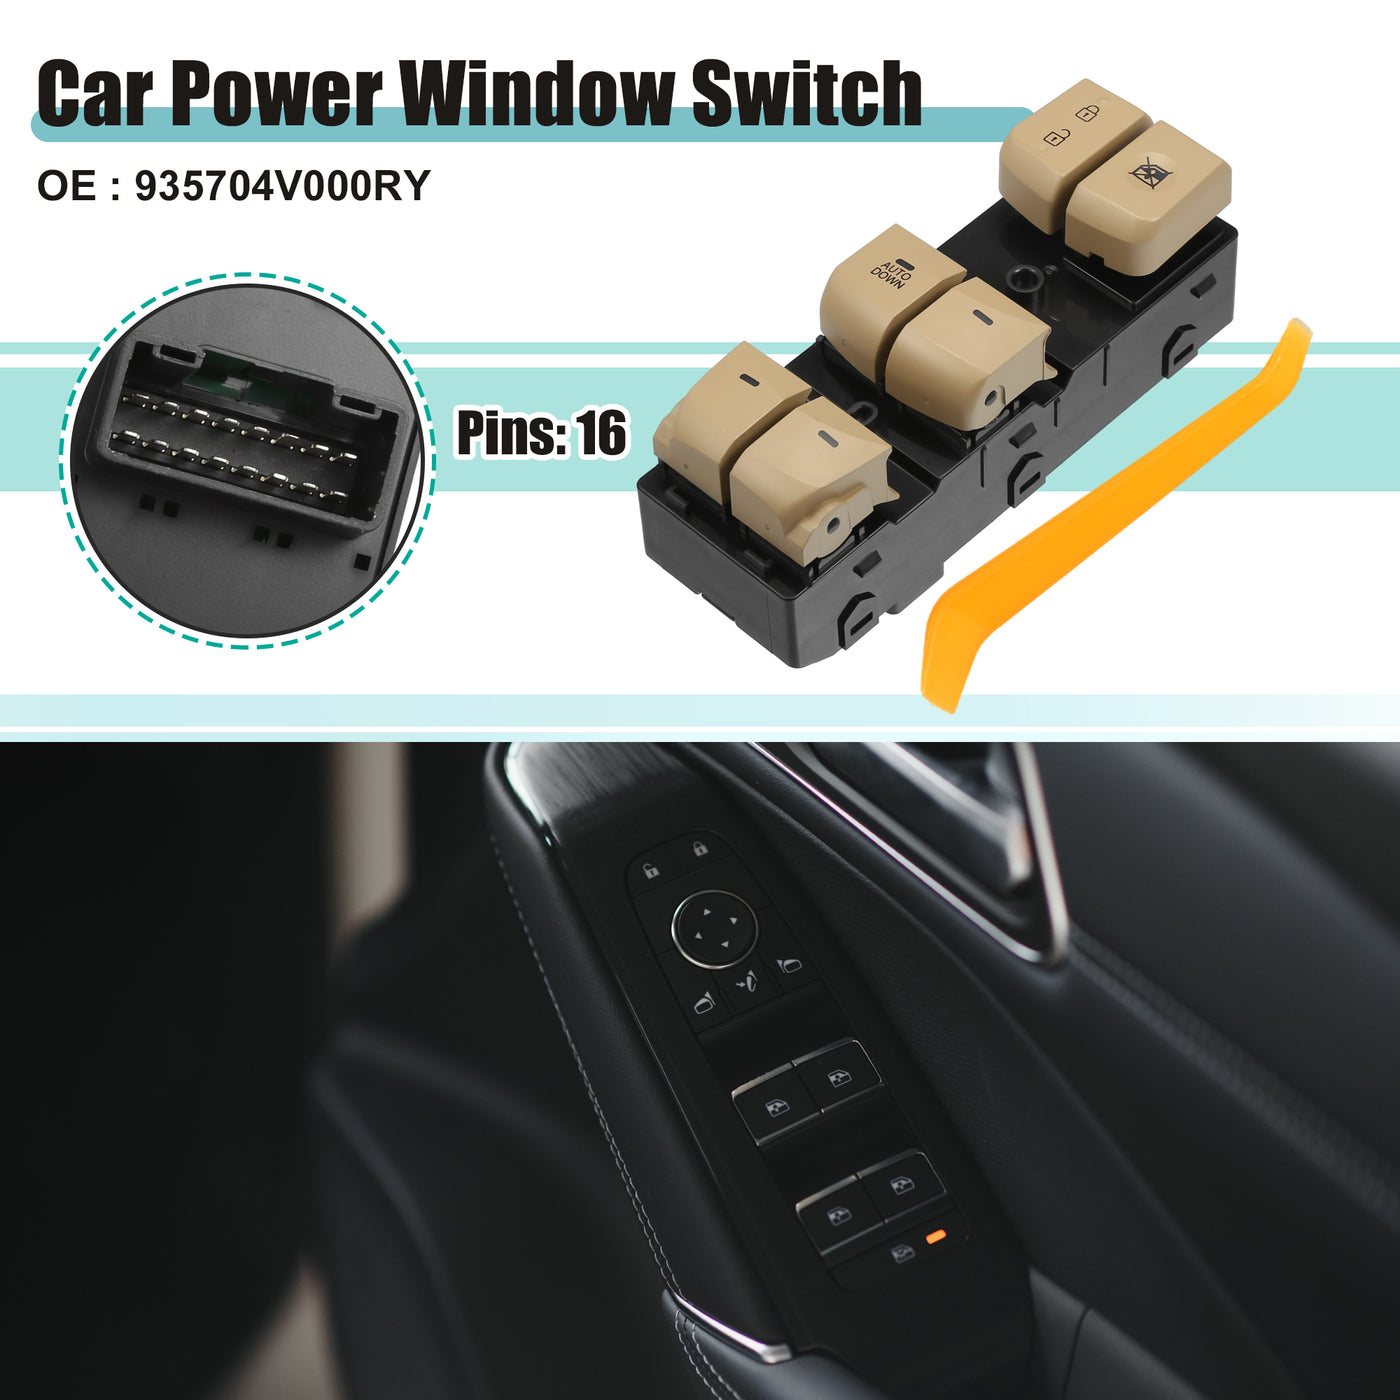 ACROPIX Power Window Switch Window Control Switch Fit for Hyundai Elantra Move 2012-2016 with Removal Tool No.935704V000RY - Pack of 1